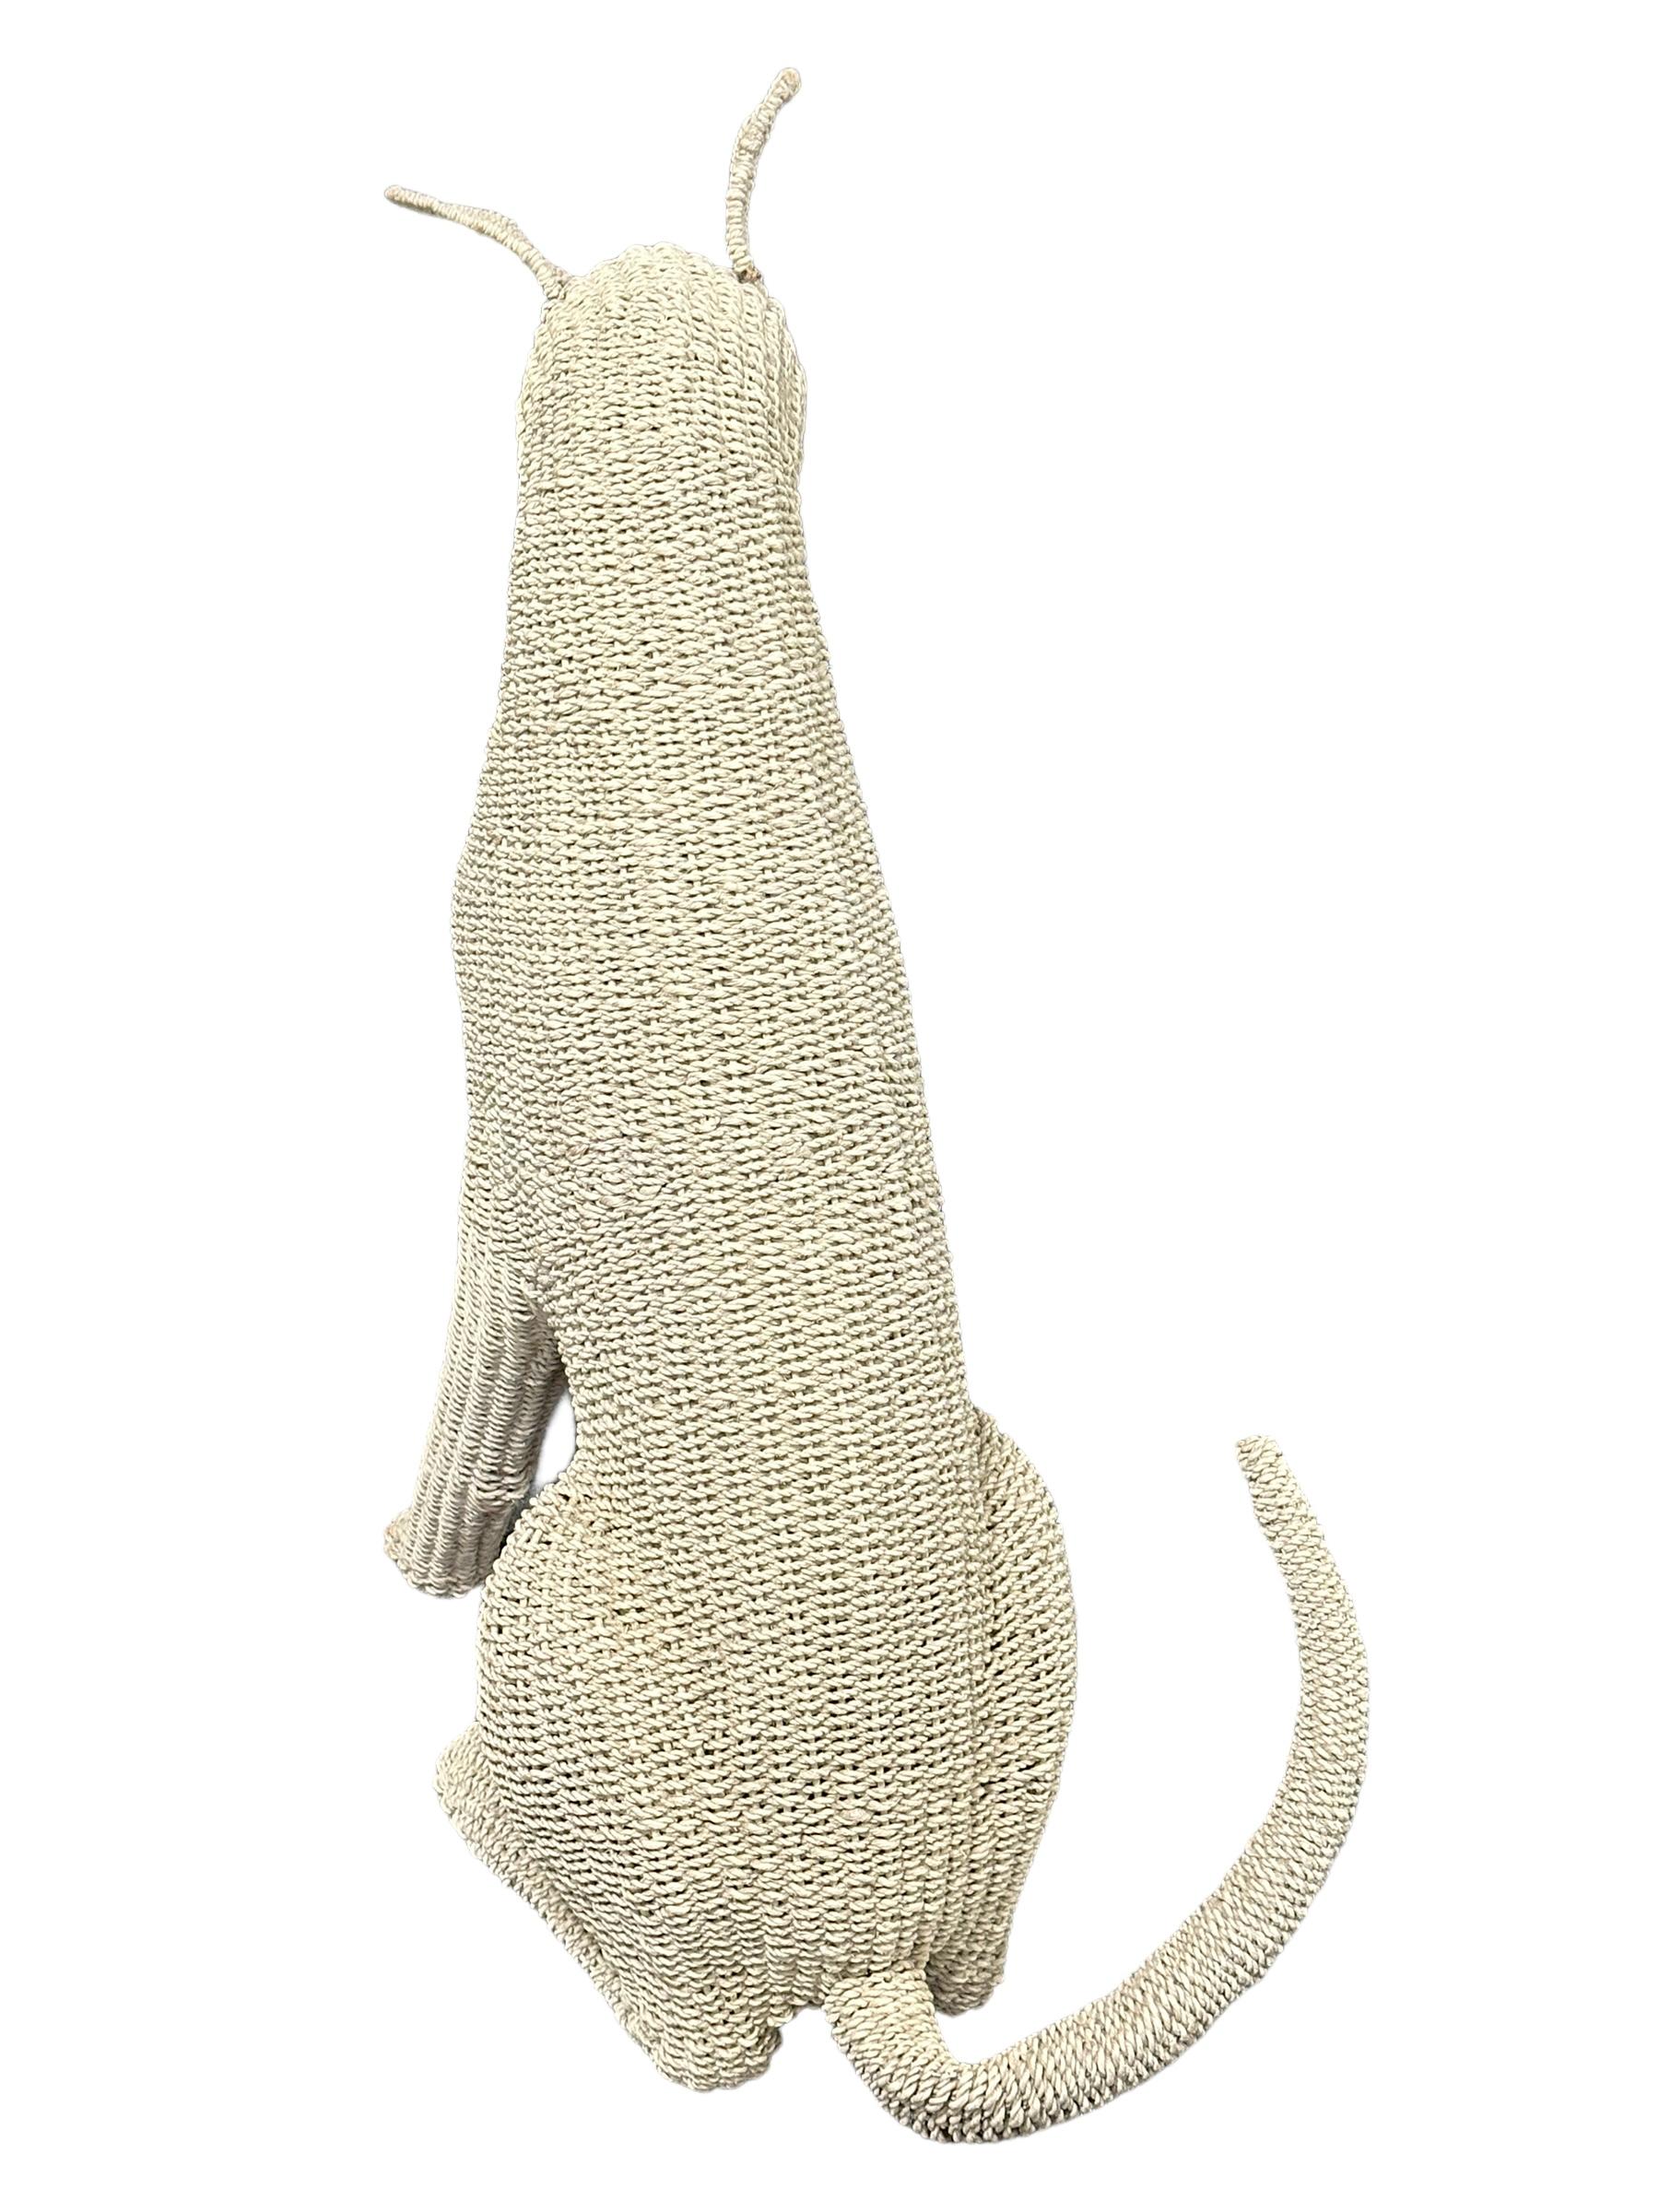 Hand-Crafted Stunning Life Size White Rattan Wicker Dog Statue Figure, Italy, 1960s For Sale